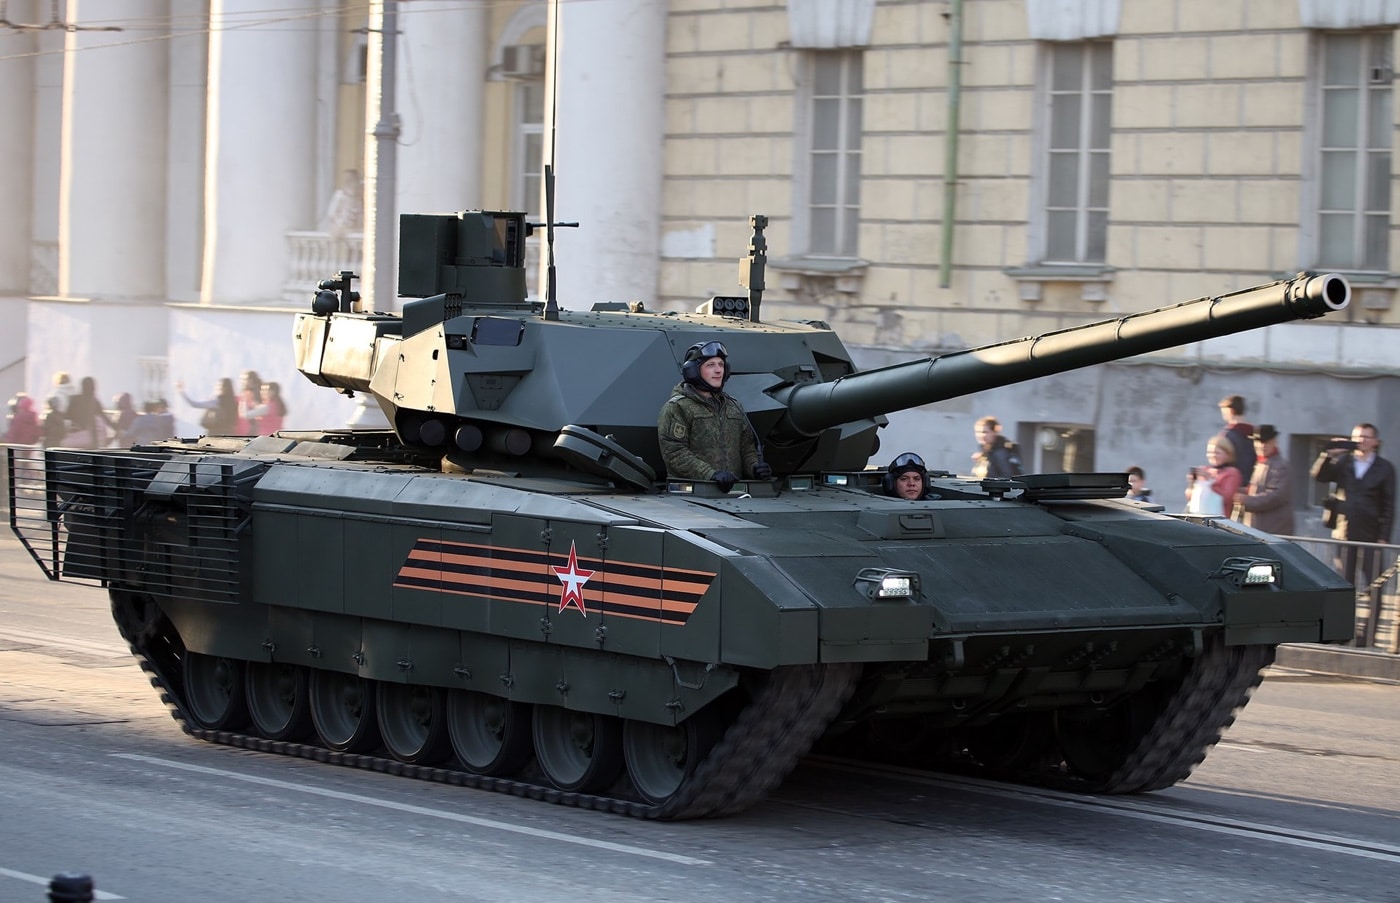 In this photo, we see new T-14 Armata battle tanks in a Moscow military parade. Much of the tank is automated with an armored capsule for the crew and commander. Existing tankers are unlikely to trust the vehicle during direct assault operations. Russian armed forces in Ukraine have not seen the next-generation tank save for a limited introduction. It is not known if the tanks were used against Ukrainian positions. According to the state news agency, the tanks have been withdrawn from Ukraine.